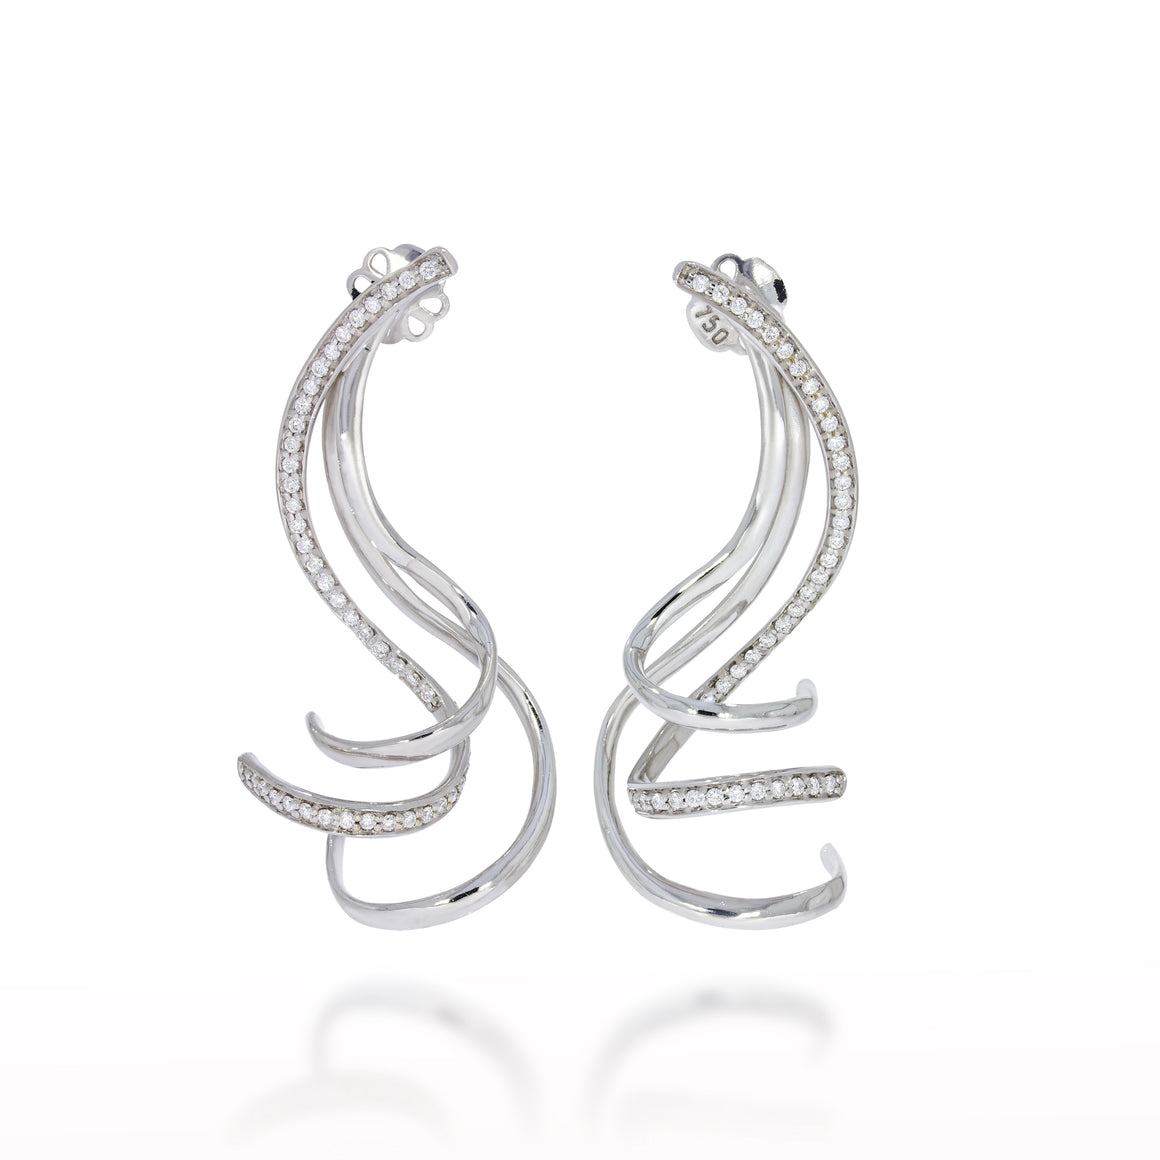 Unique and Exclusive Long Sinuous Koktail earrings. 3 strip 18k white gold, one strip set with round diamonds all the way.